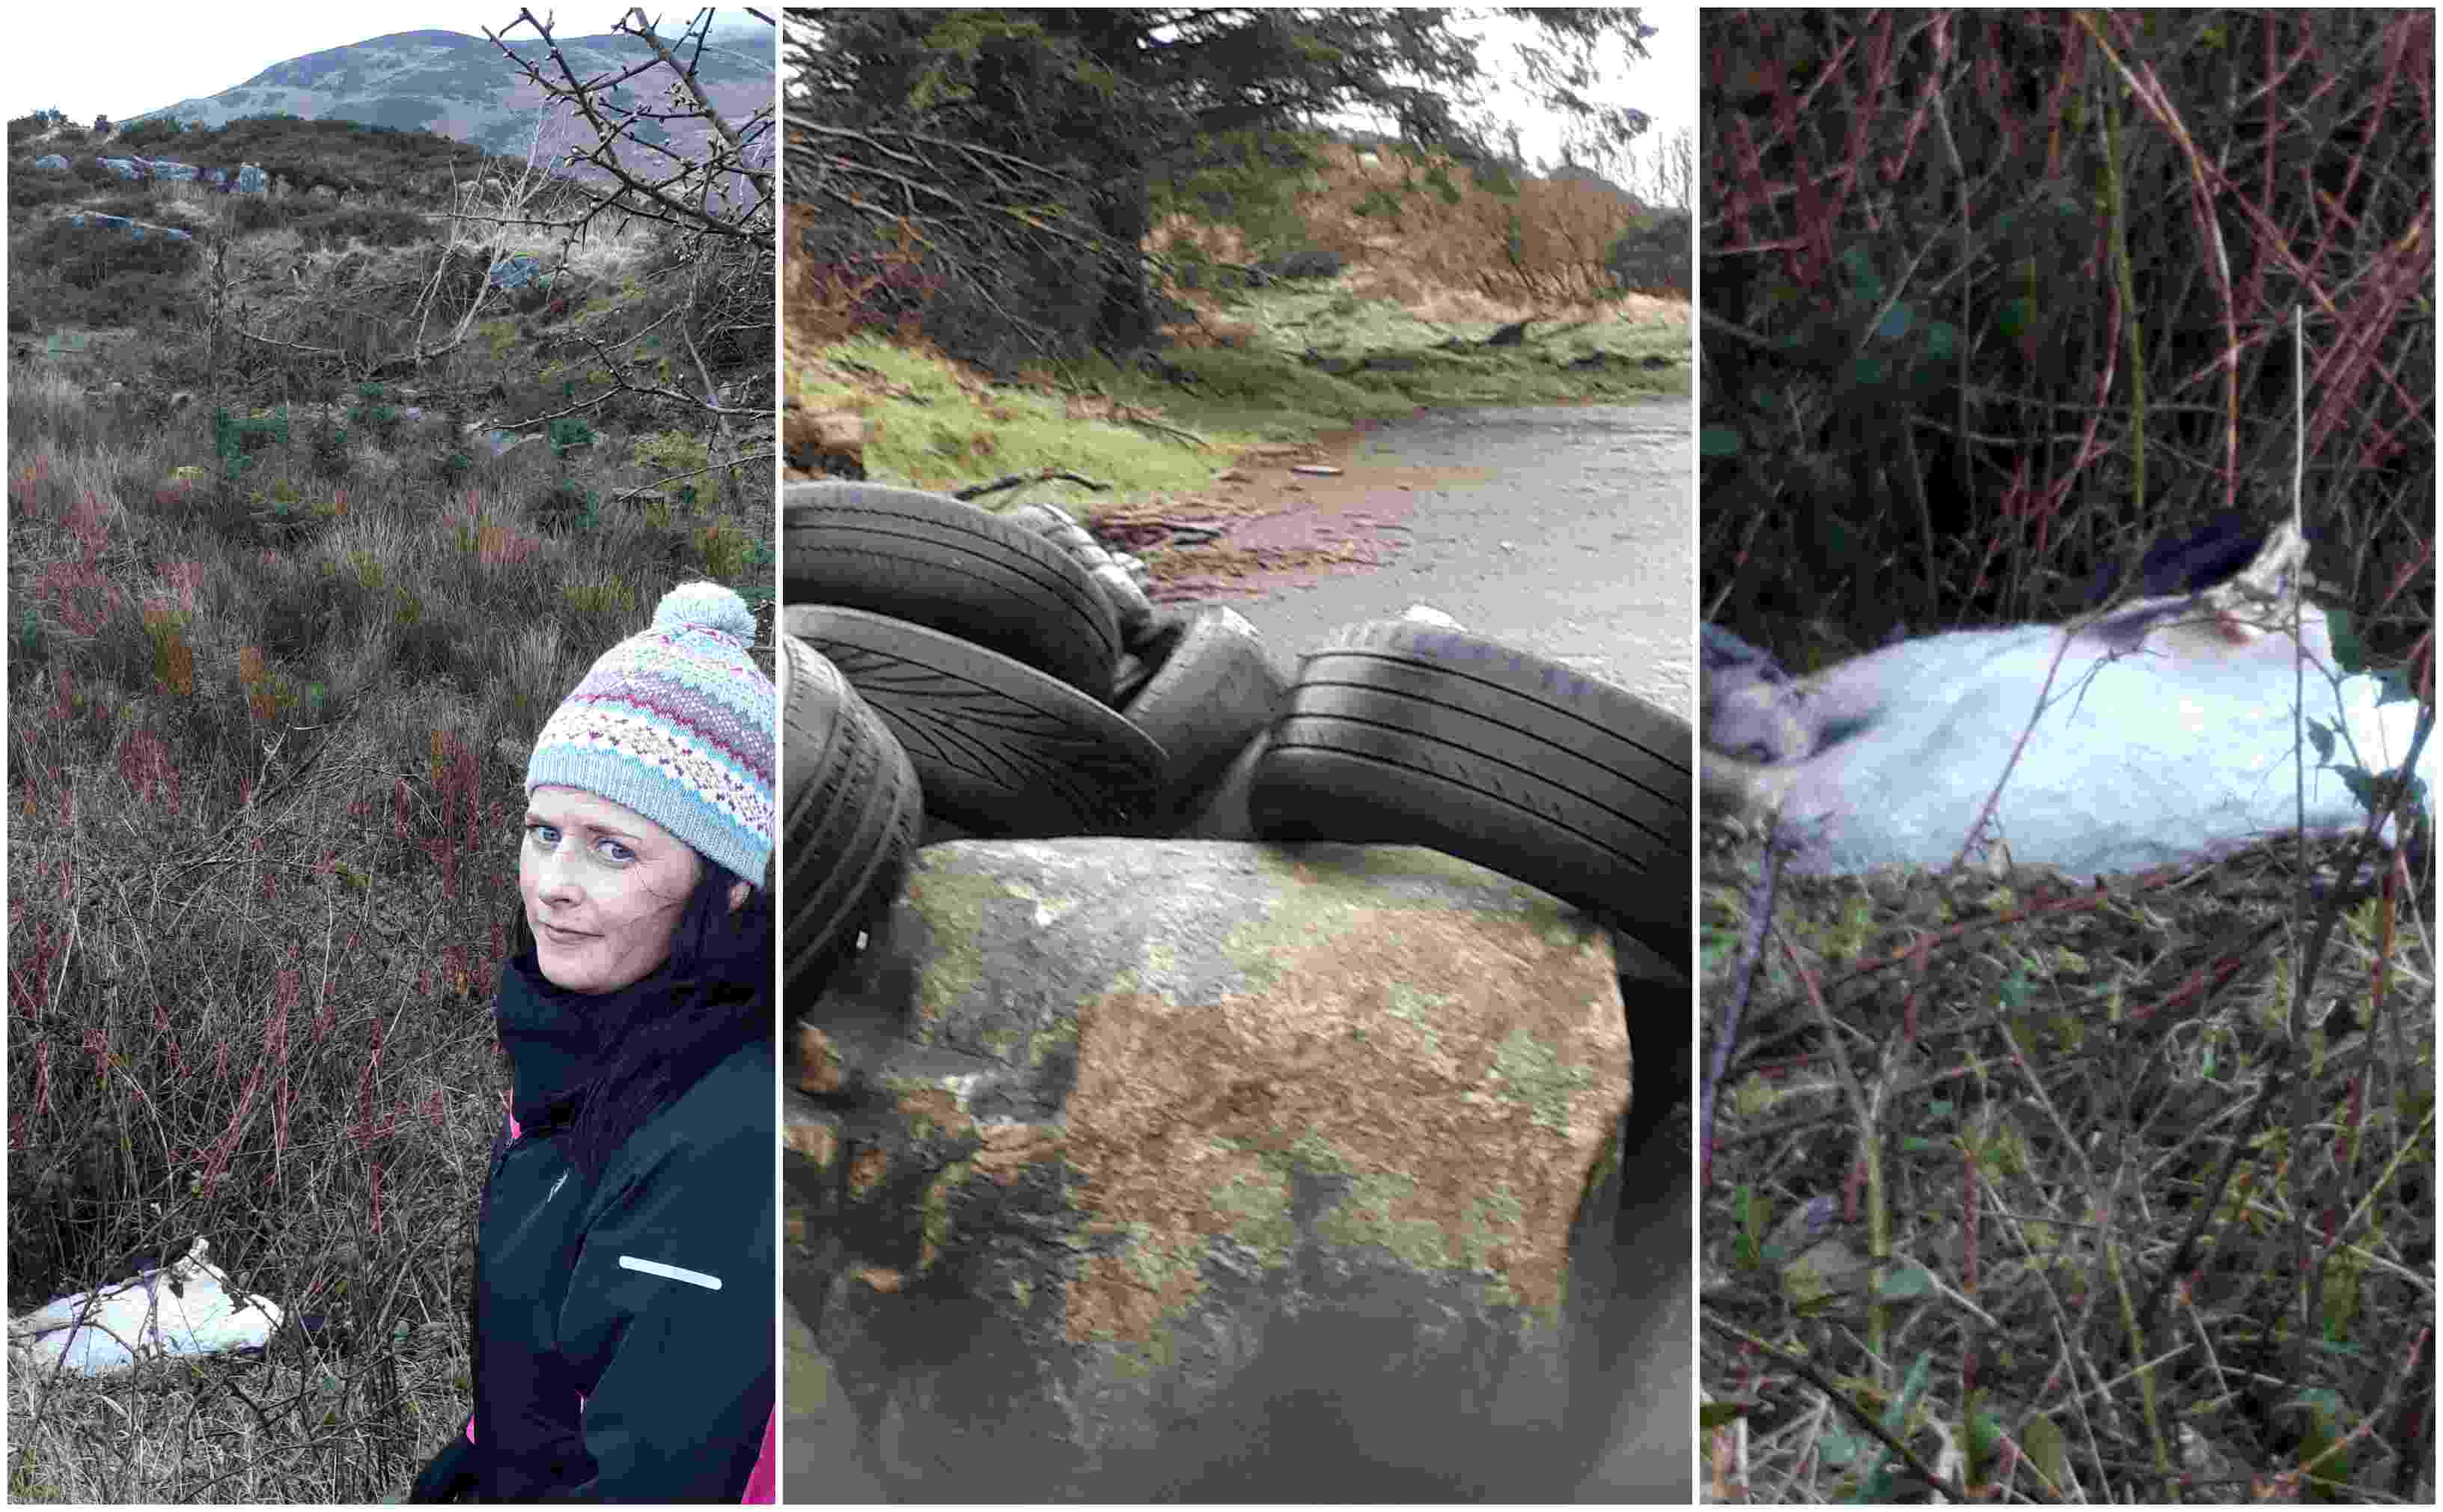 Oonagh Magennis on fly-tipping